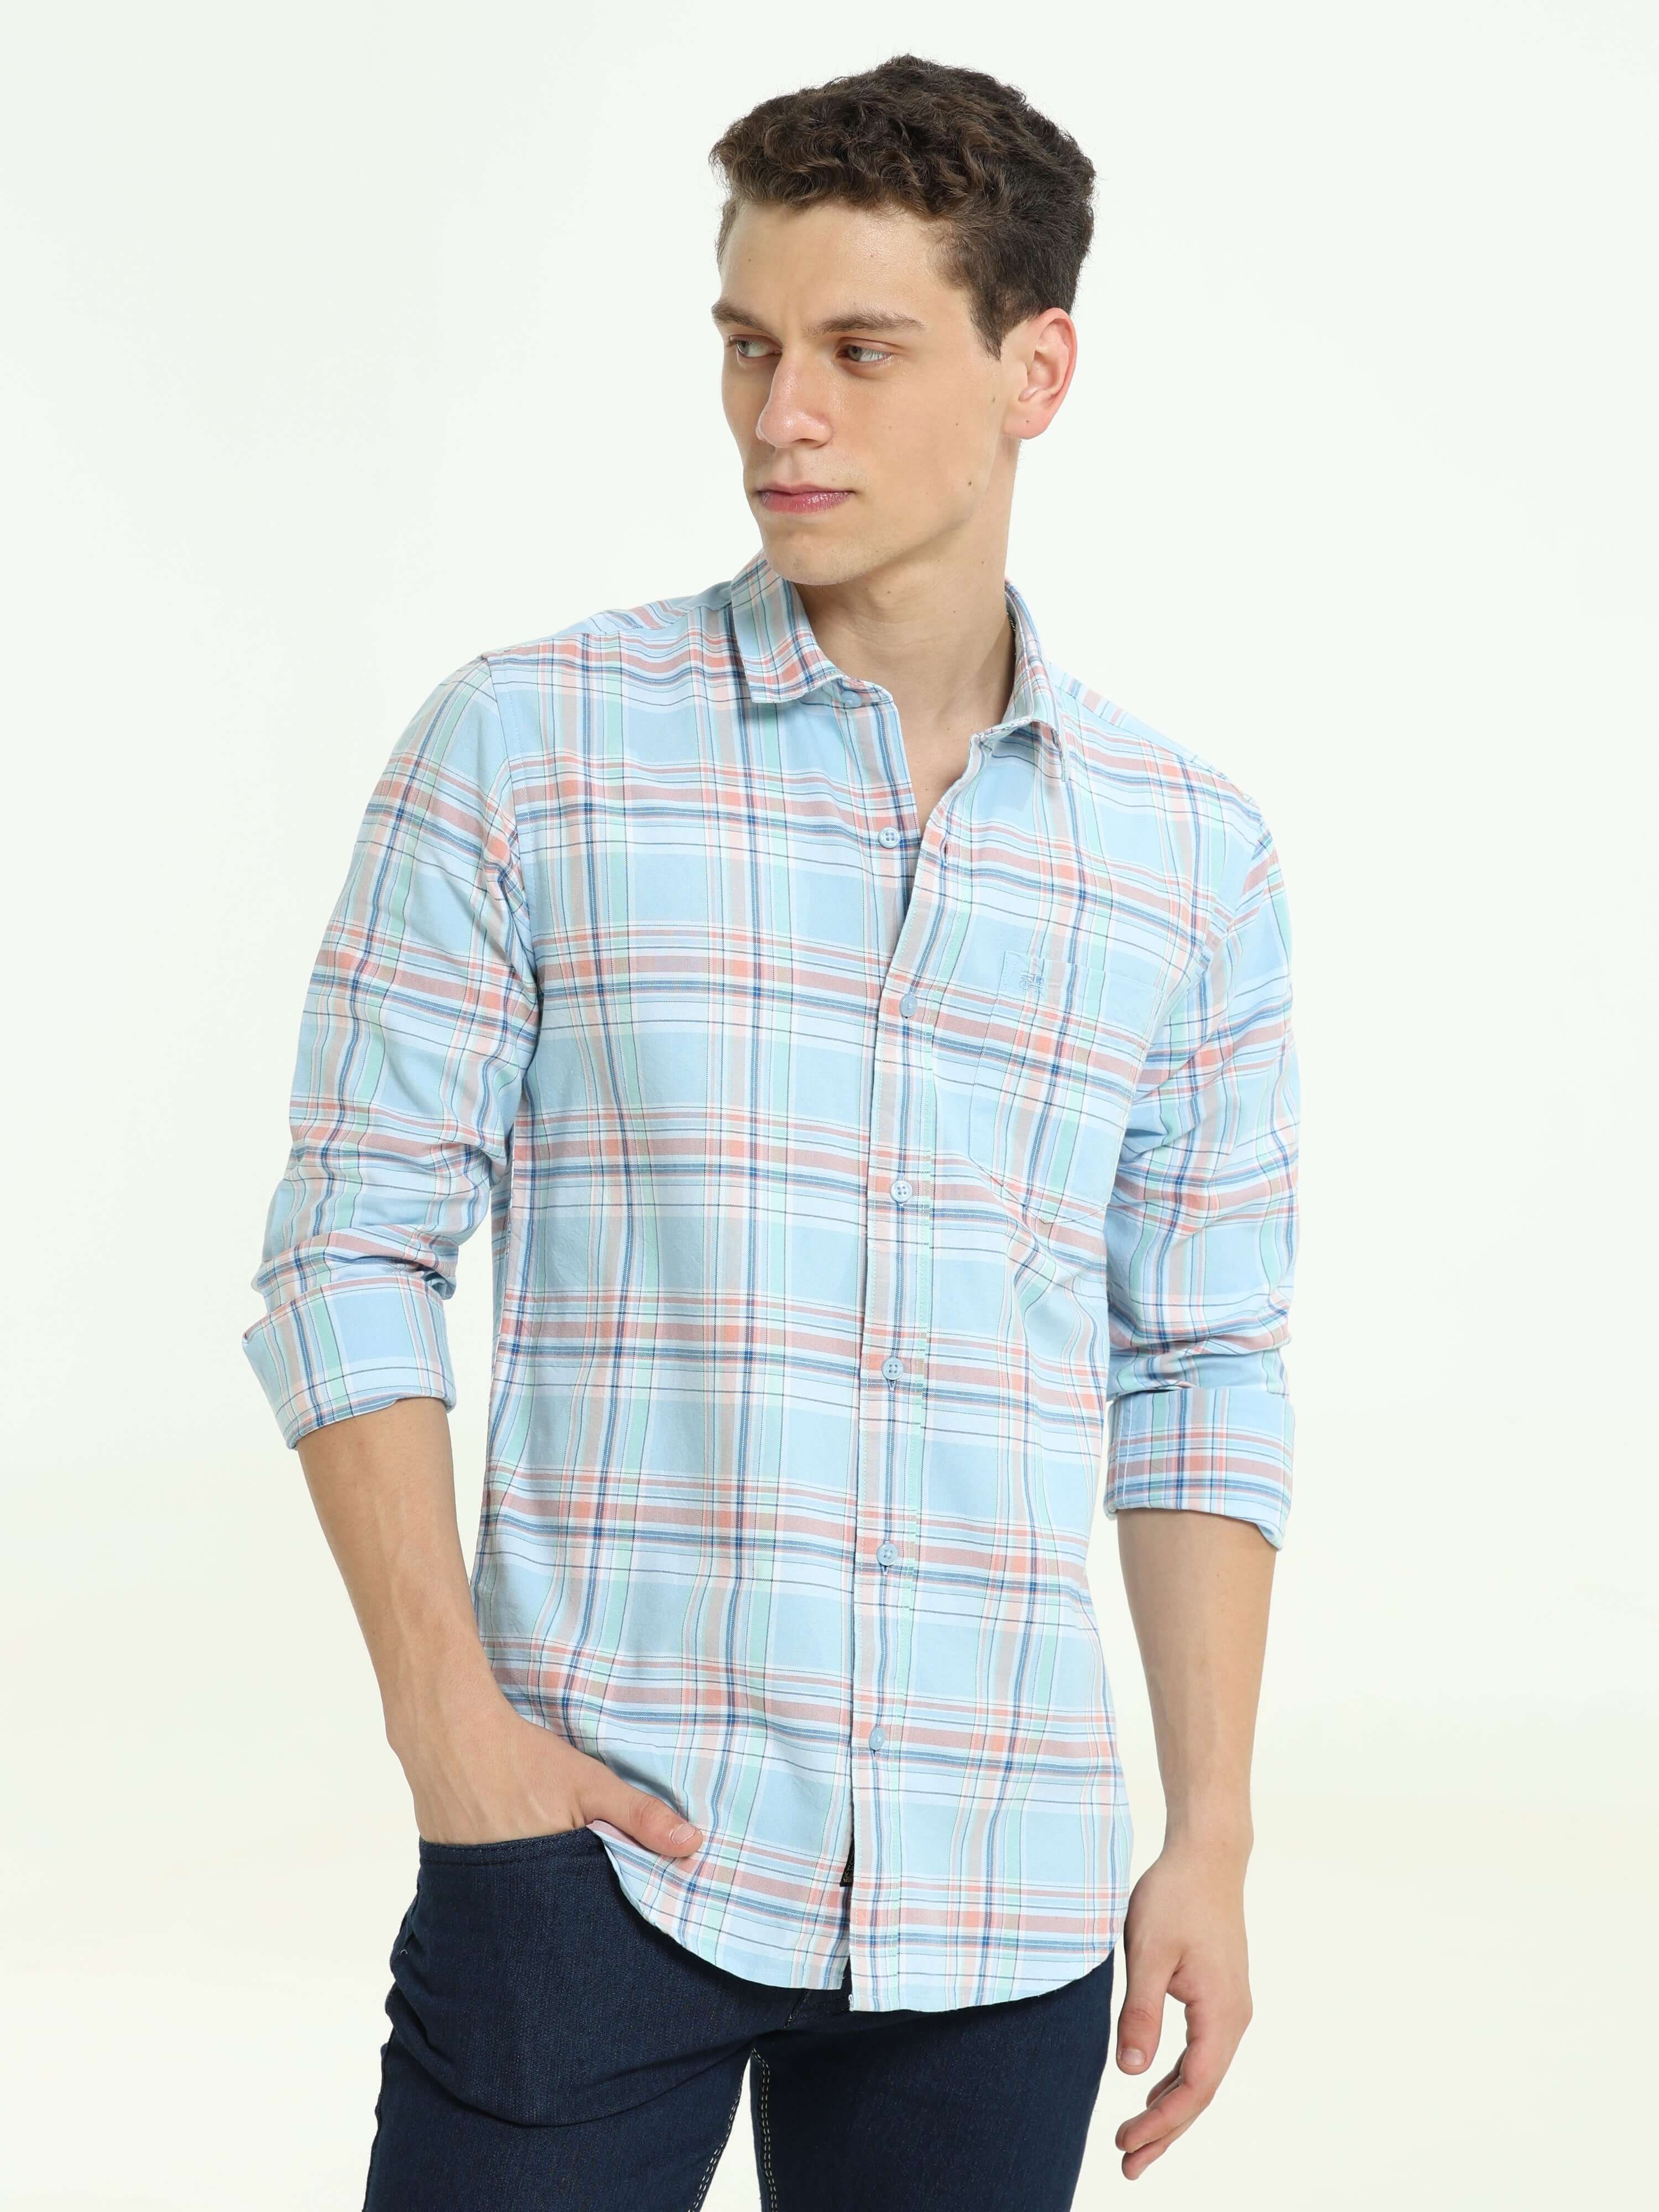 Arctic blue check casual shirt shop online at Estilocus. • Full-sleeve check shirt• Cut and sew placket• Regular collar• Double button square cuff.• Single pocket with logo embroidery• Curved hemline• All double-needle construction, finest quality sewing•